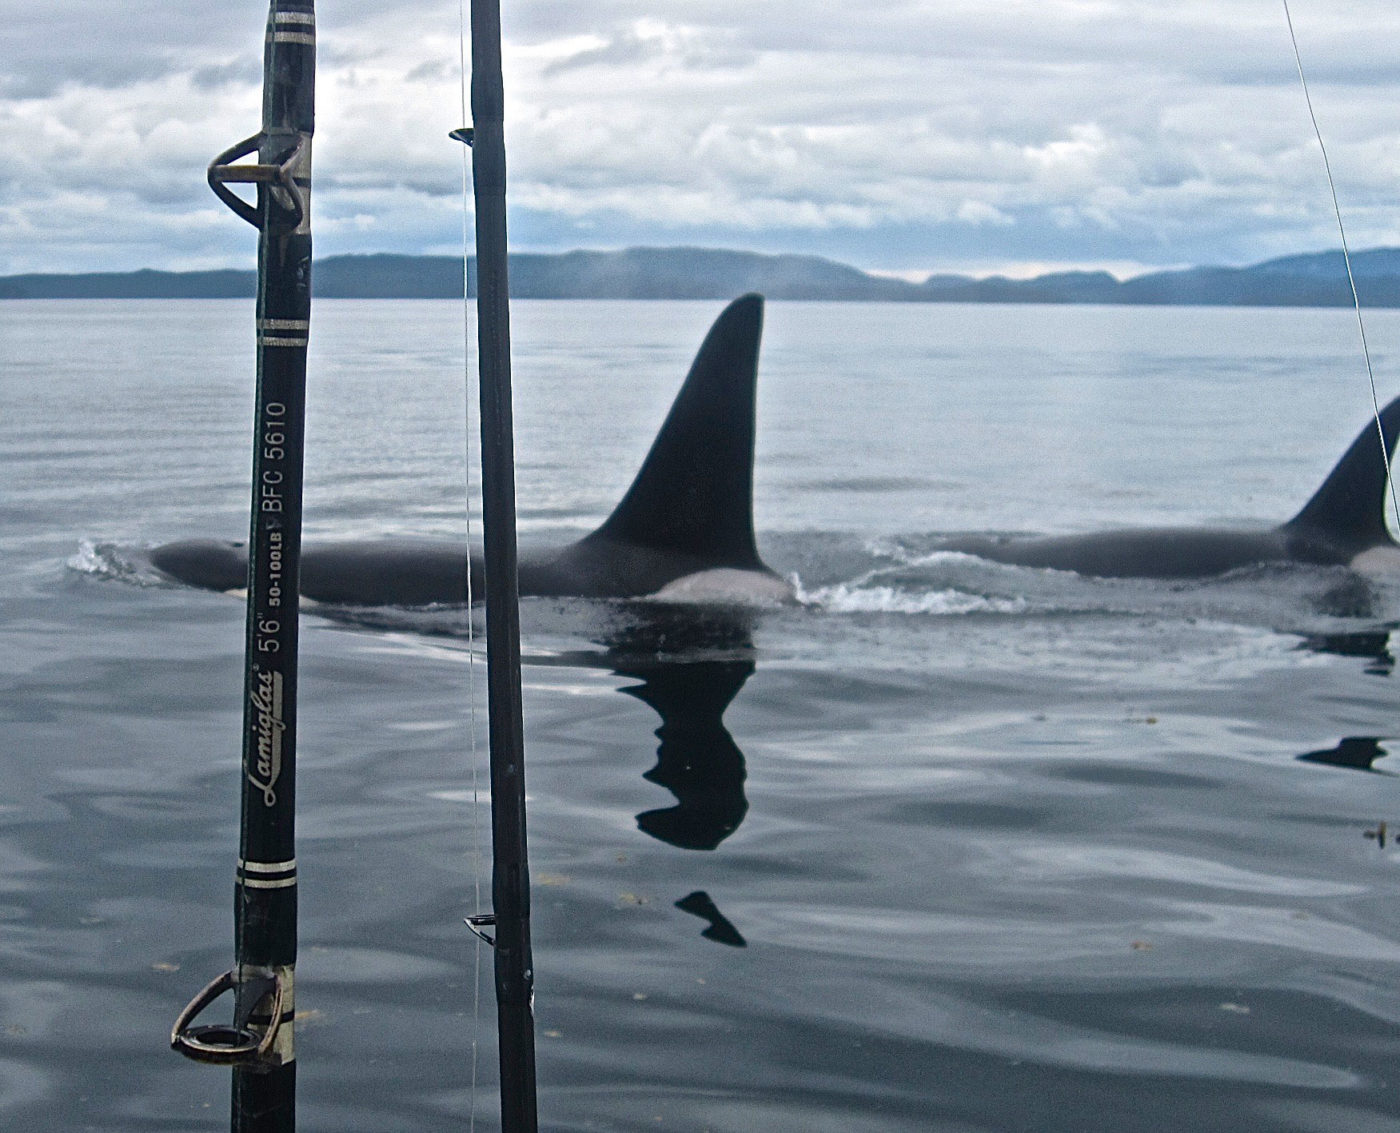 Orcas swim around the fishing boat, fishing rods in the foreground.